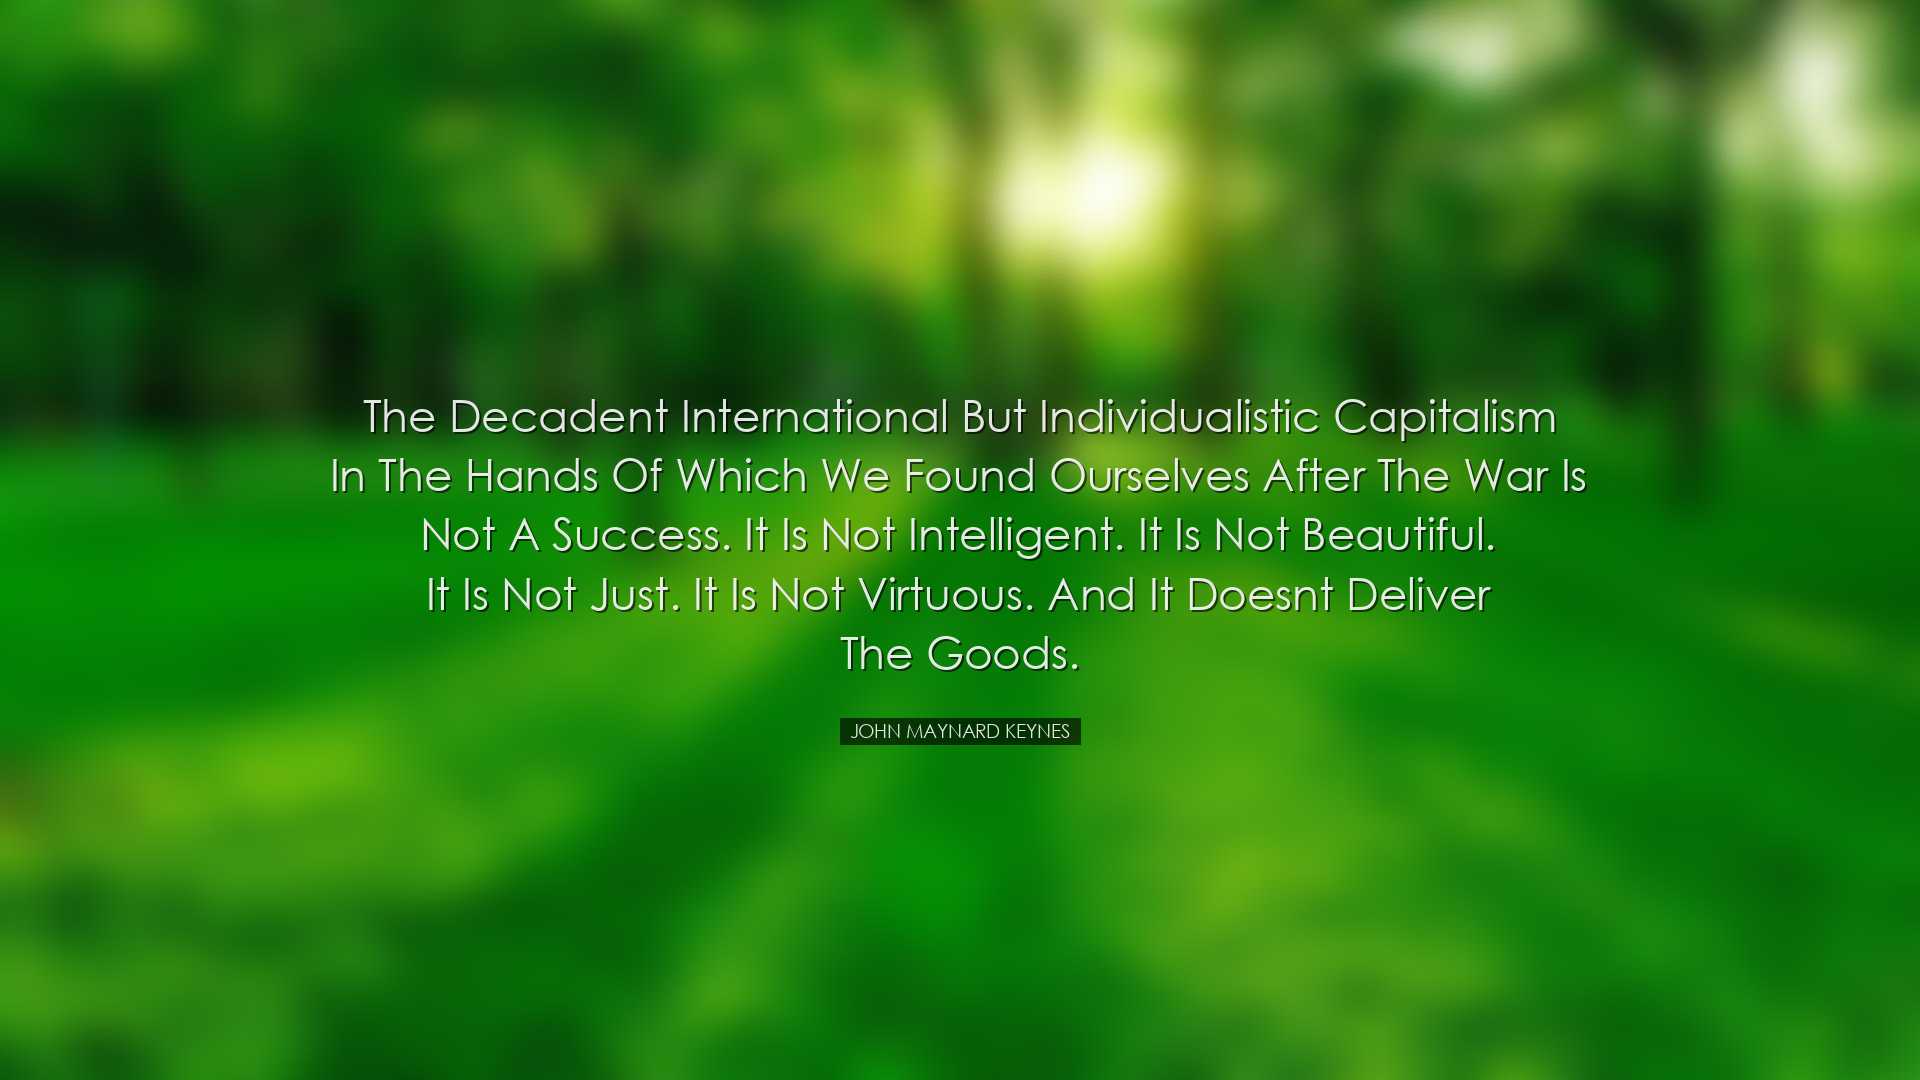 The decadent international but individualistic capitalism in the h